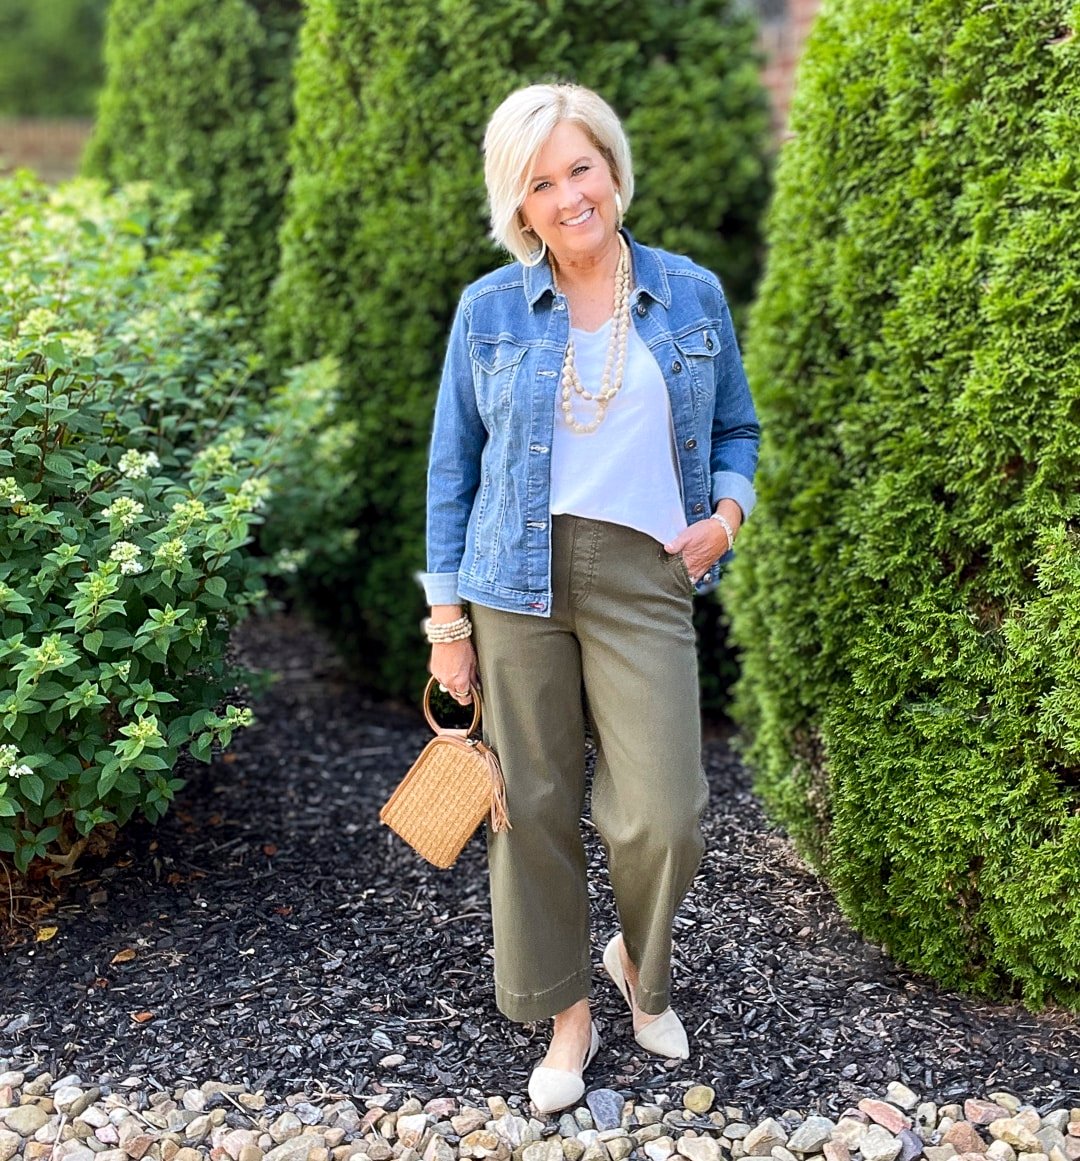 Over 40 Fashion Blogger, Tania Stephens is wearing SPANX crop pants and a denim jacket5